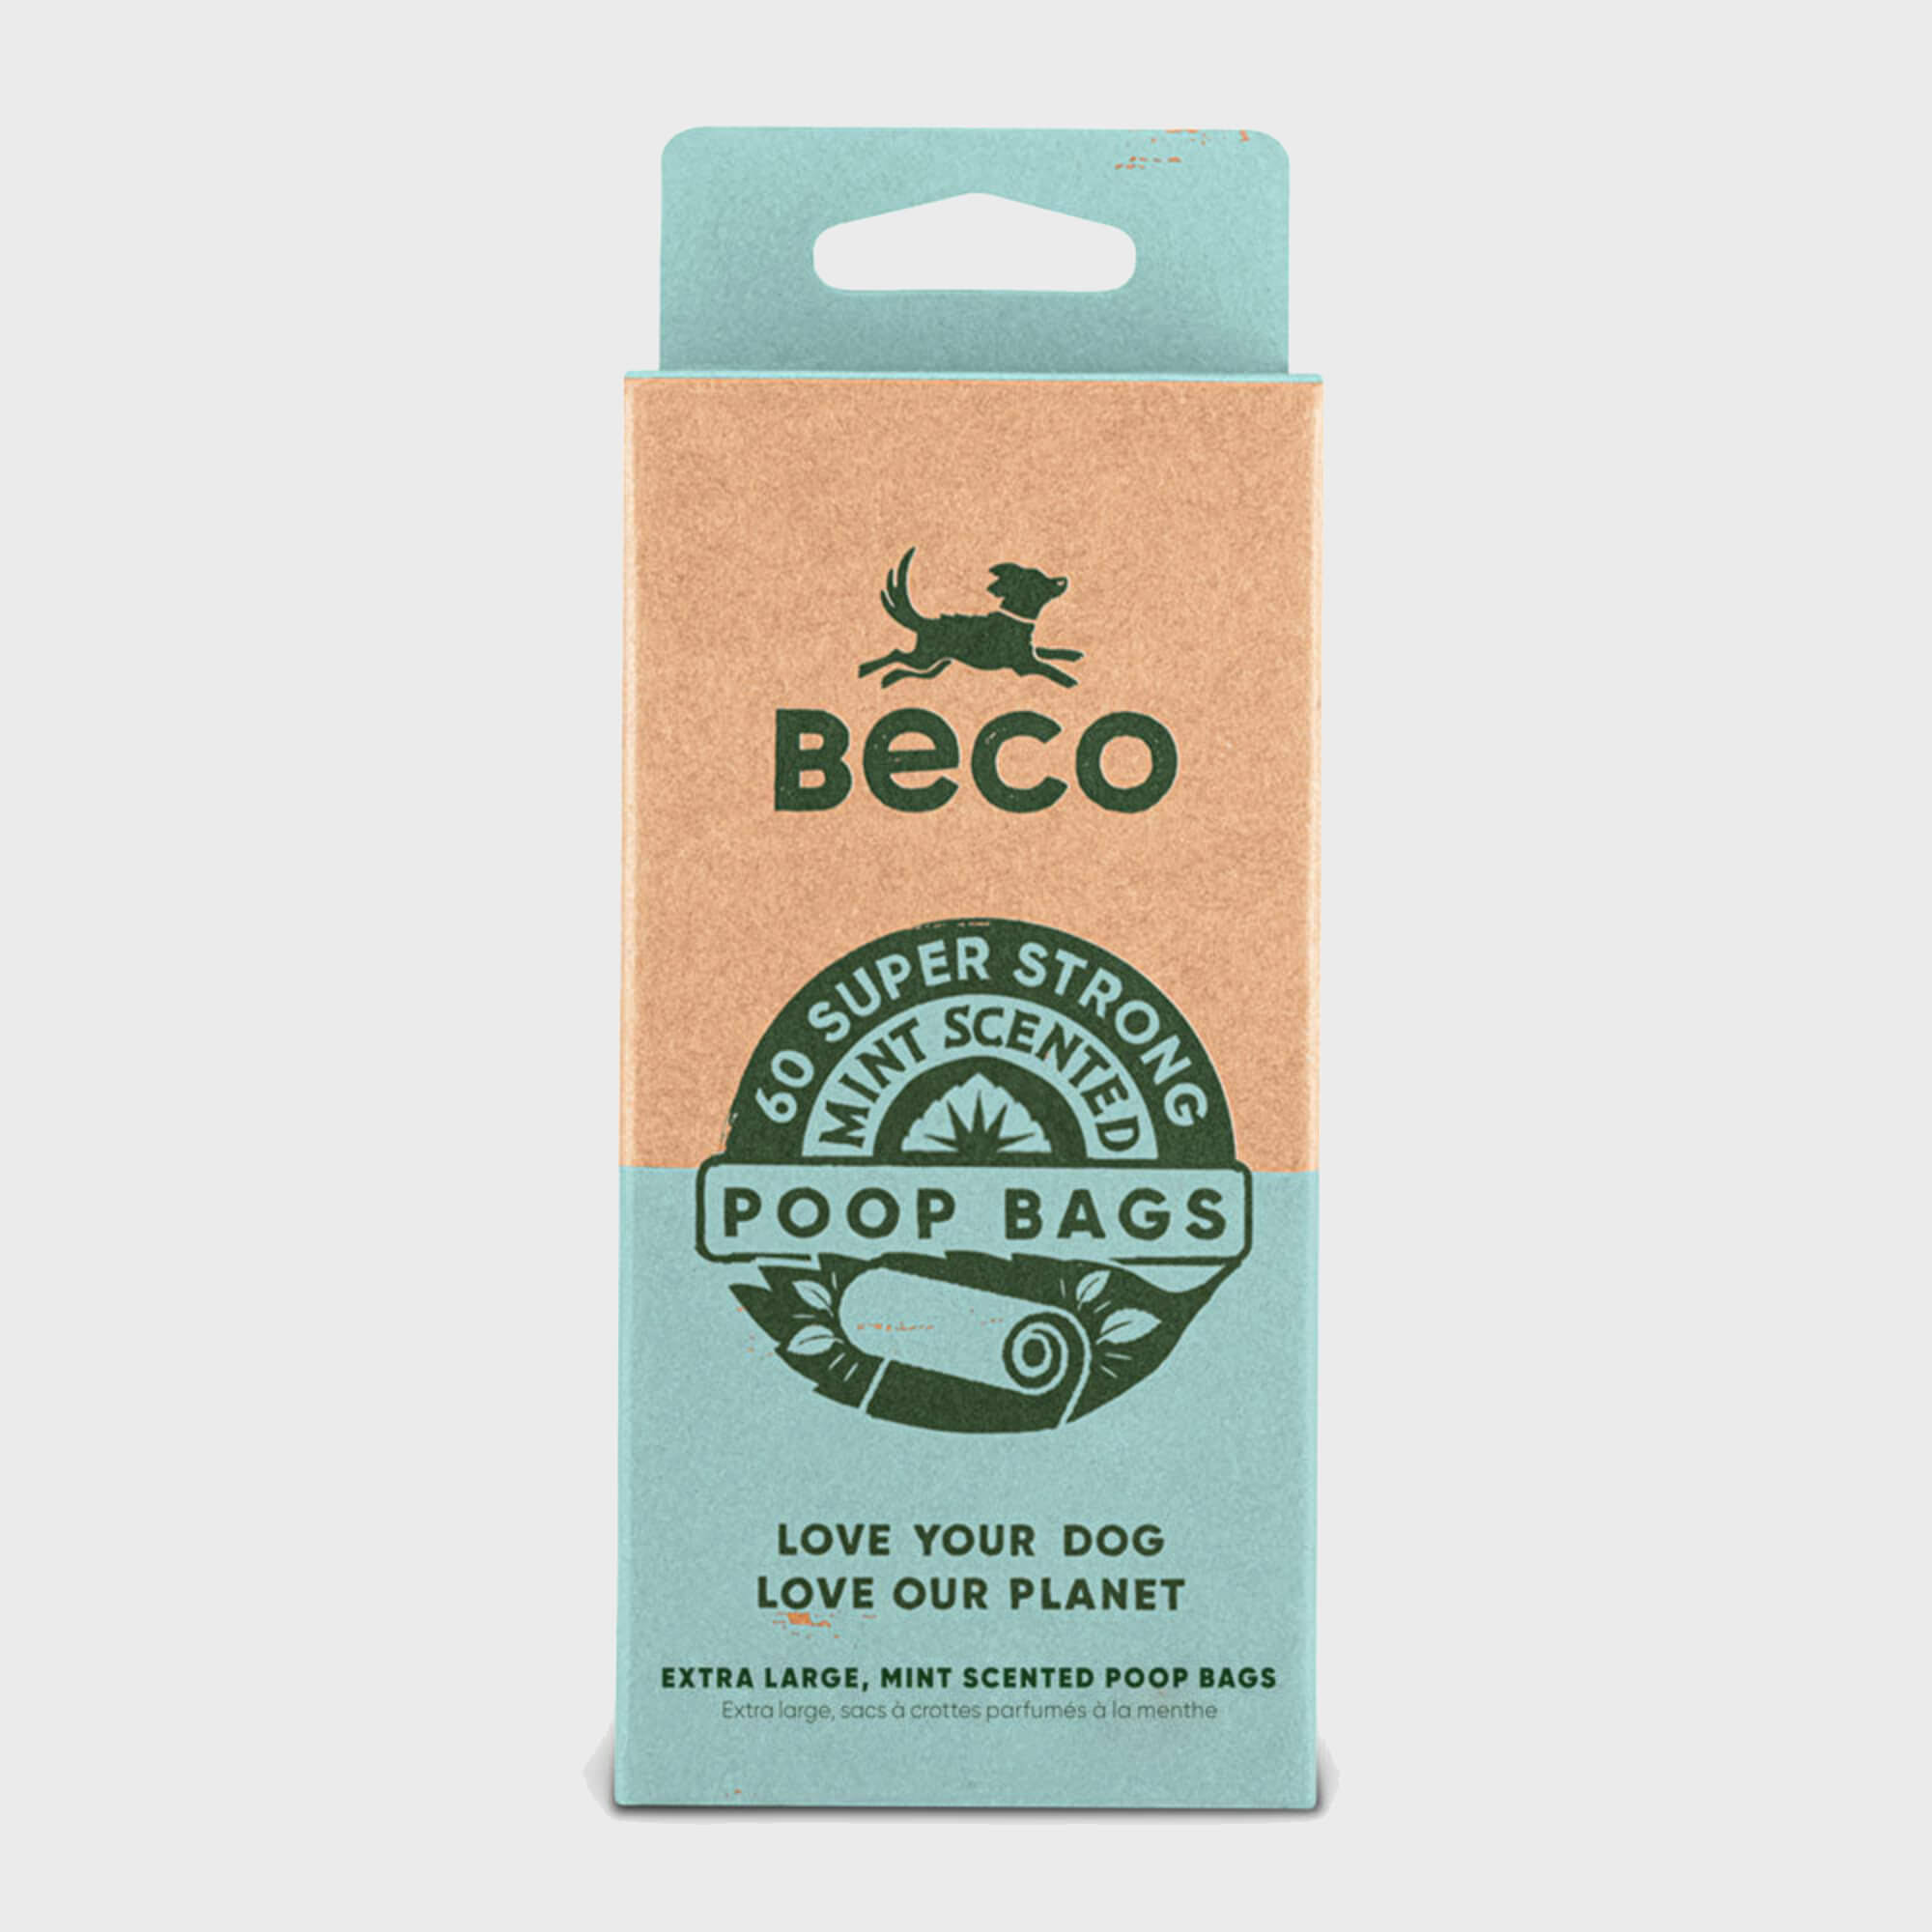 Beco Degradable Mint Scented Poop Bags 60 Pack